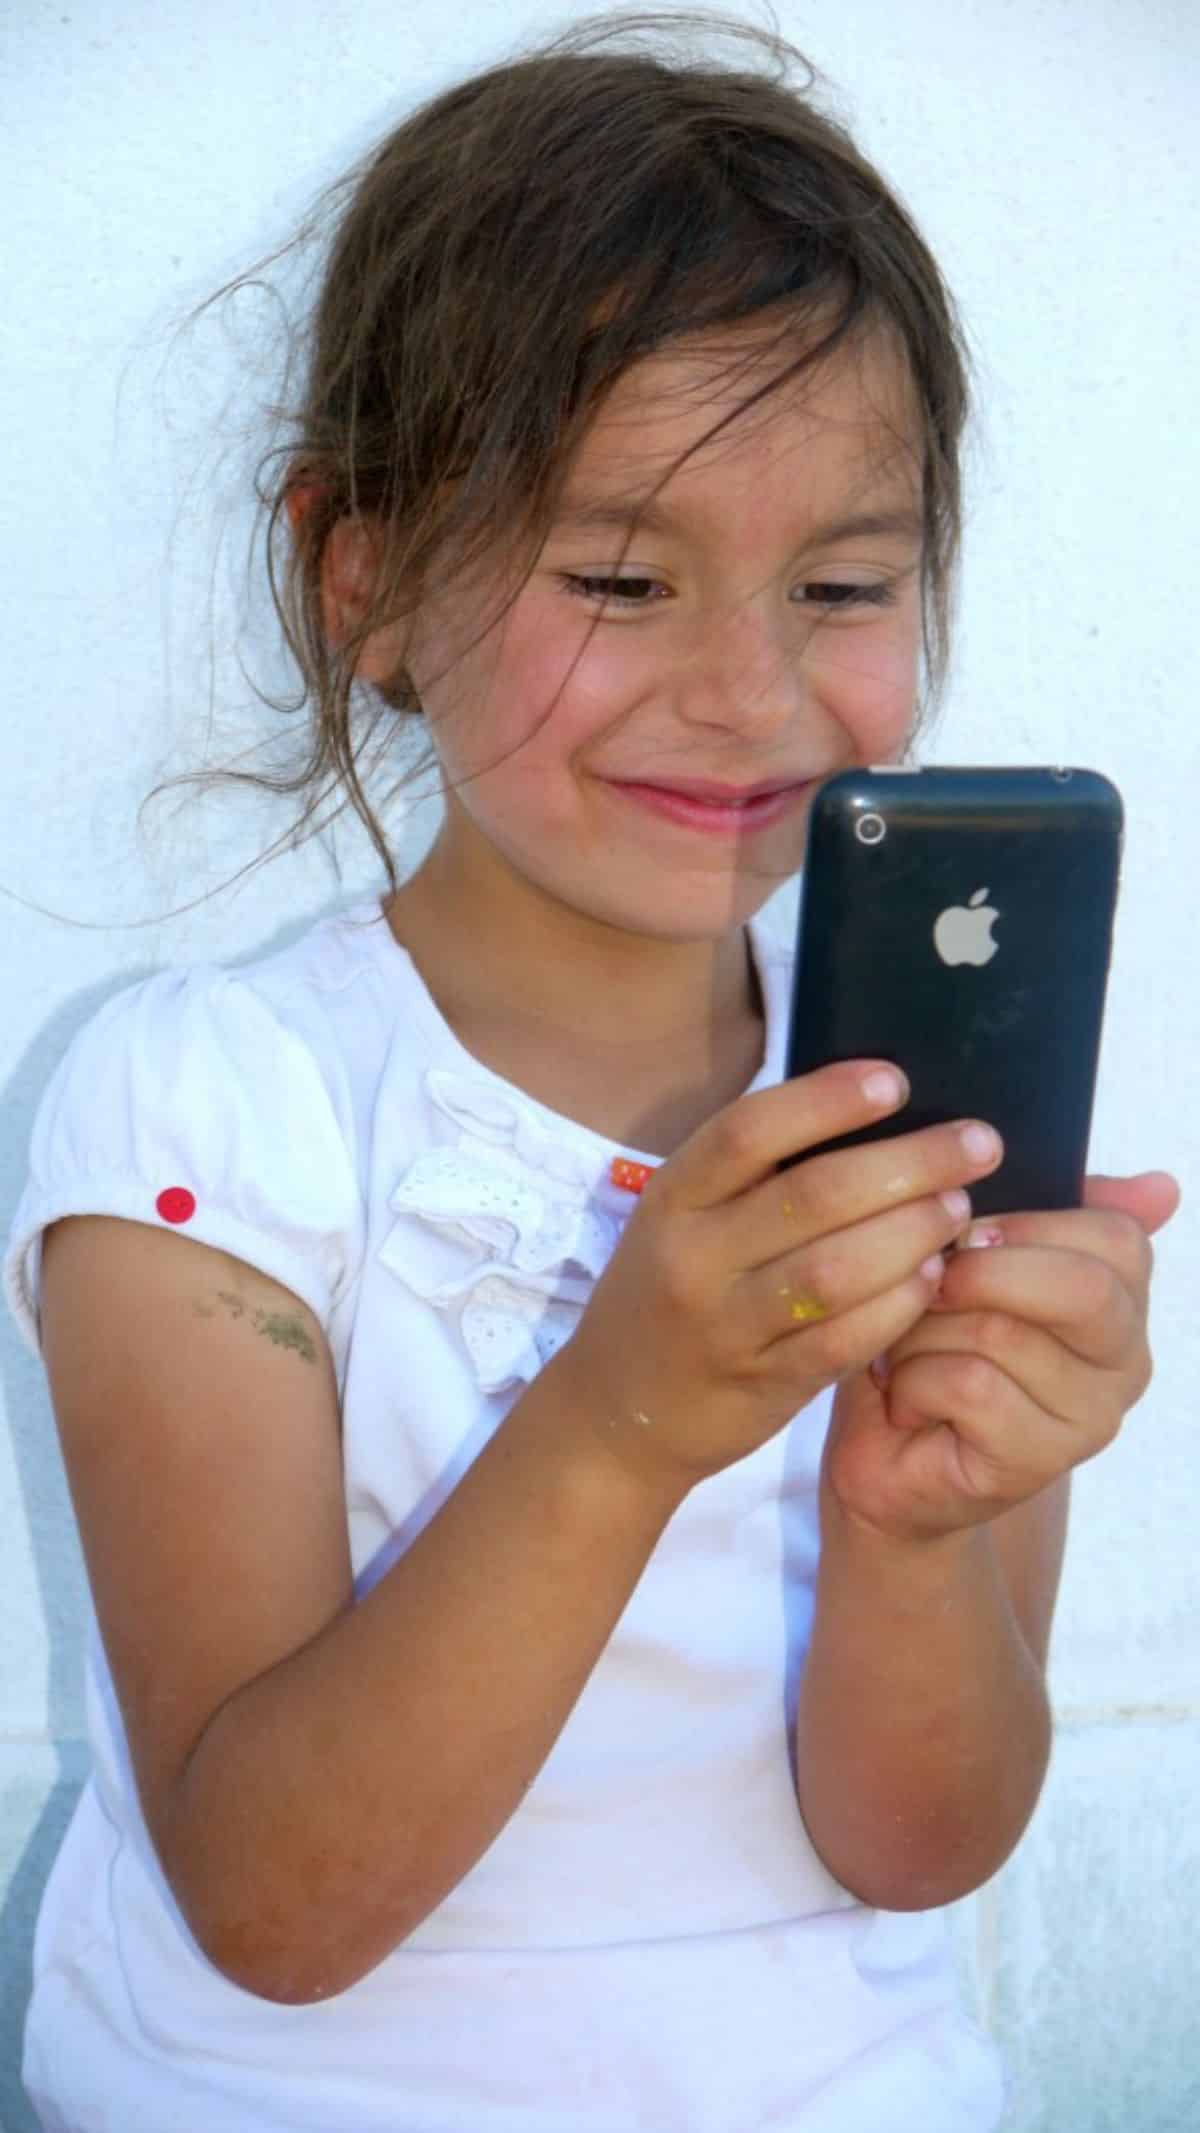 Smiling young girl holding an Iphone.